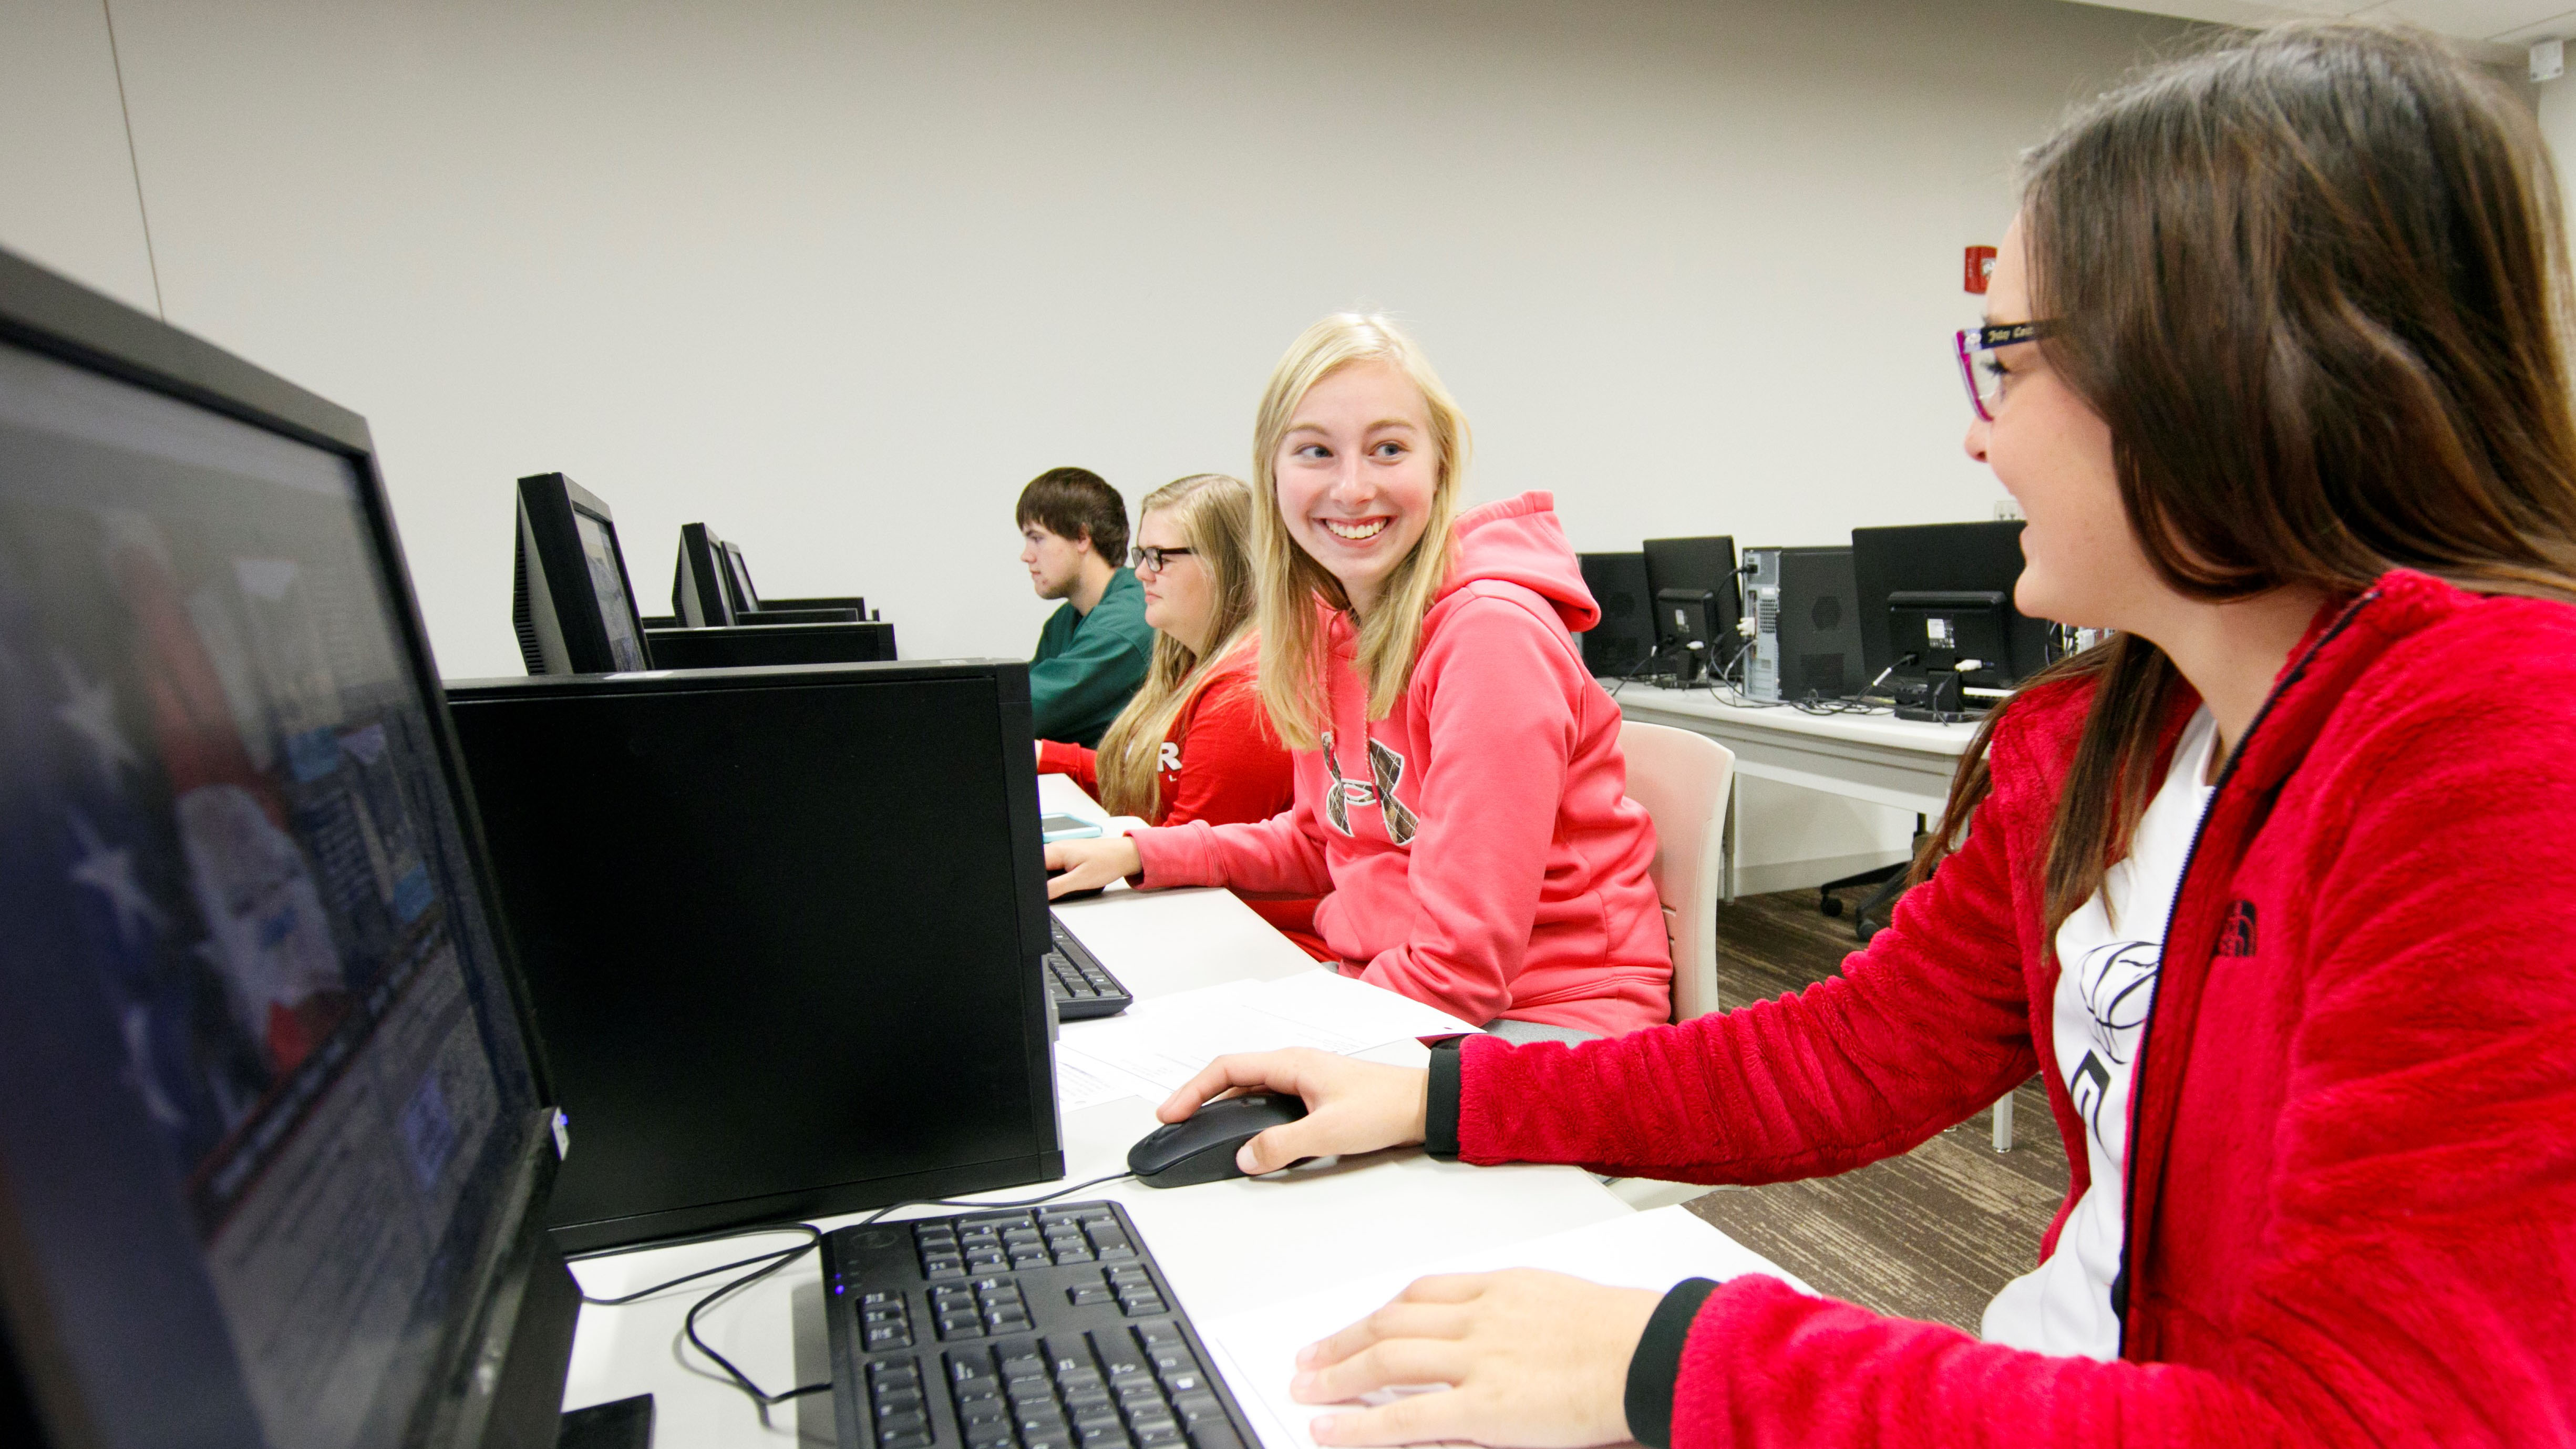 NCTA students will transition to remote classes beginning Monday, March 30.  (Chandler /NCTA Photo)